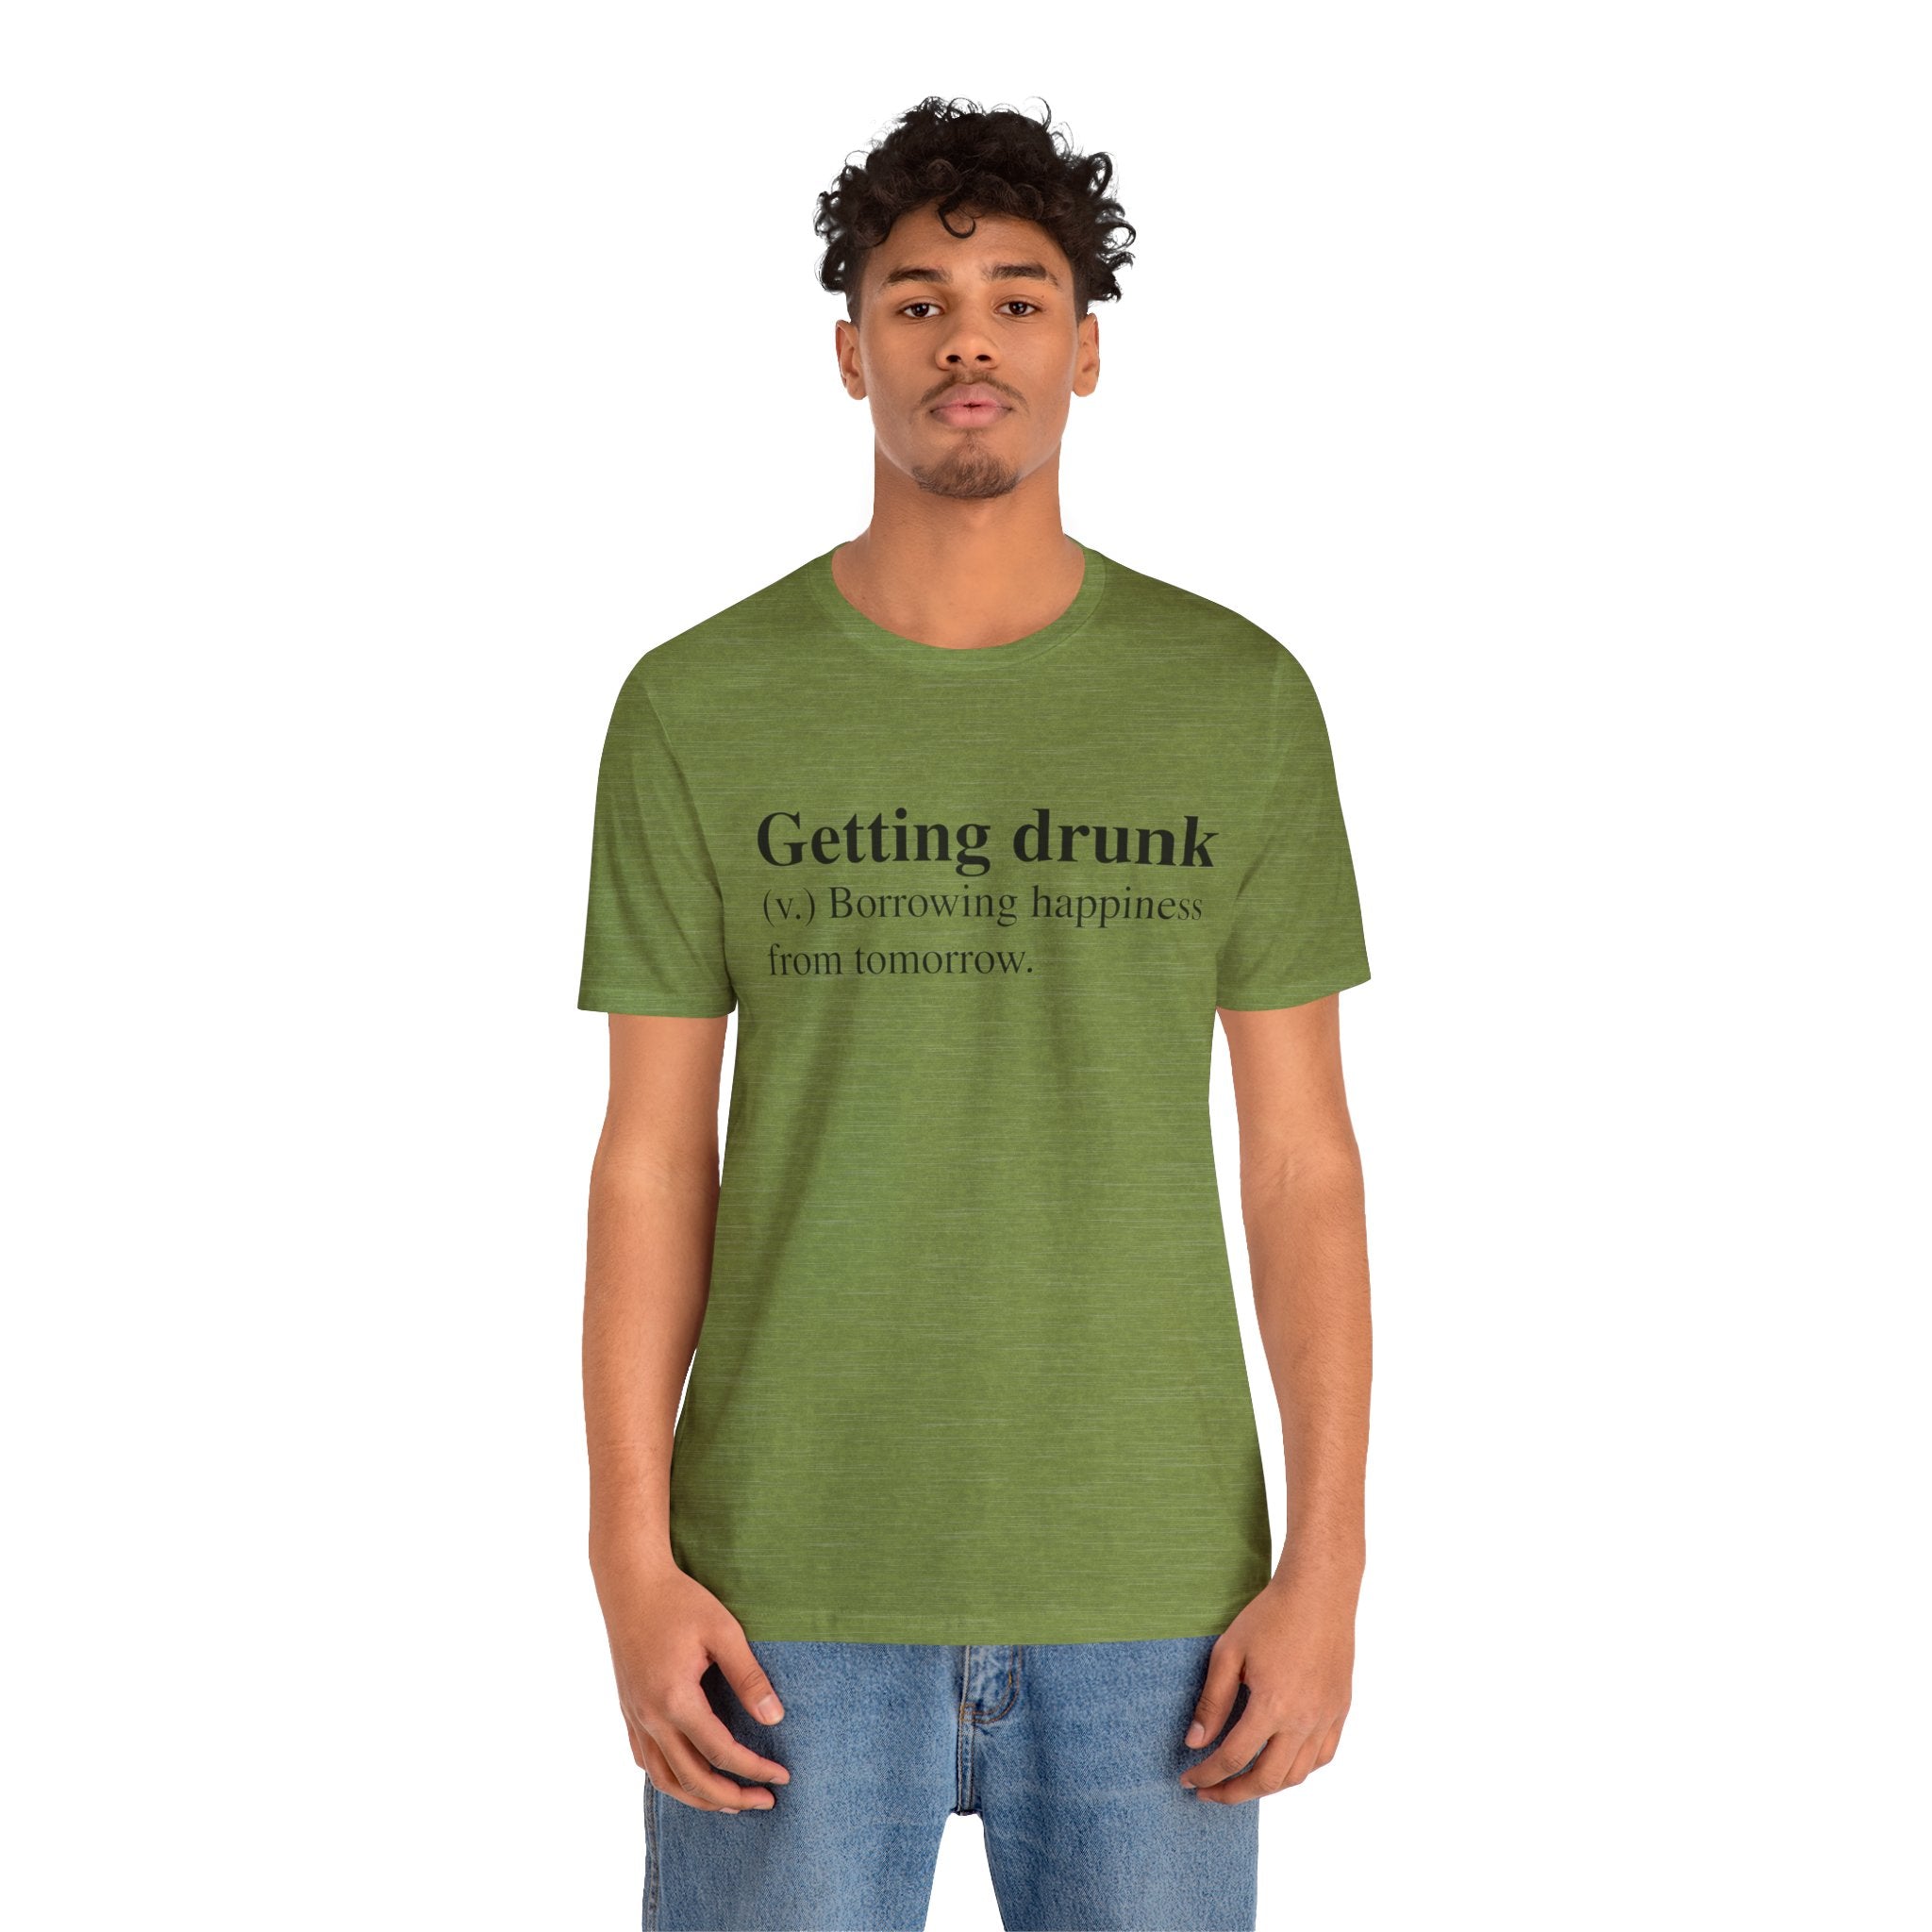 Man in a green, soft cotton Getting Drunk T-Shirt with the text "getting drunk: borrowing happiness from tomorrow," standing against a white background.